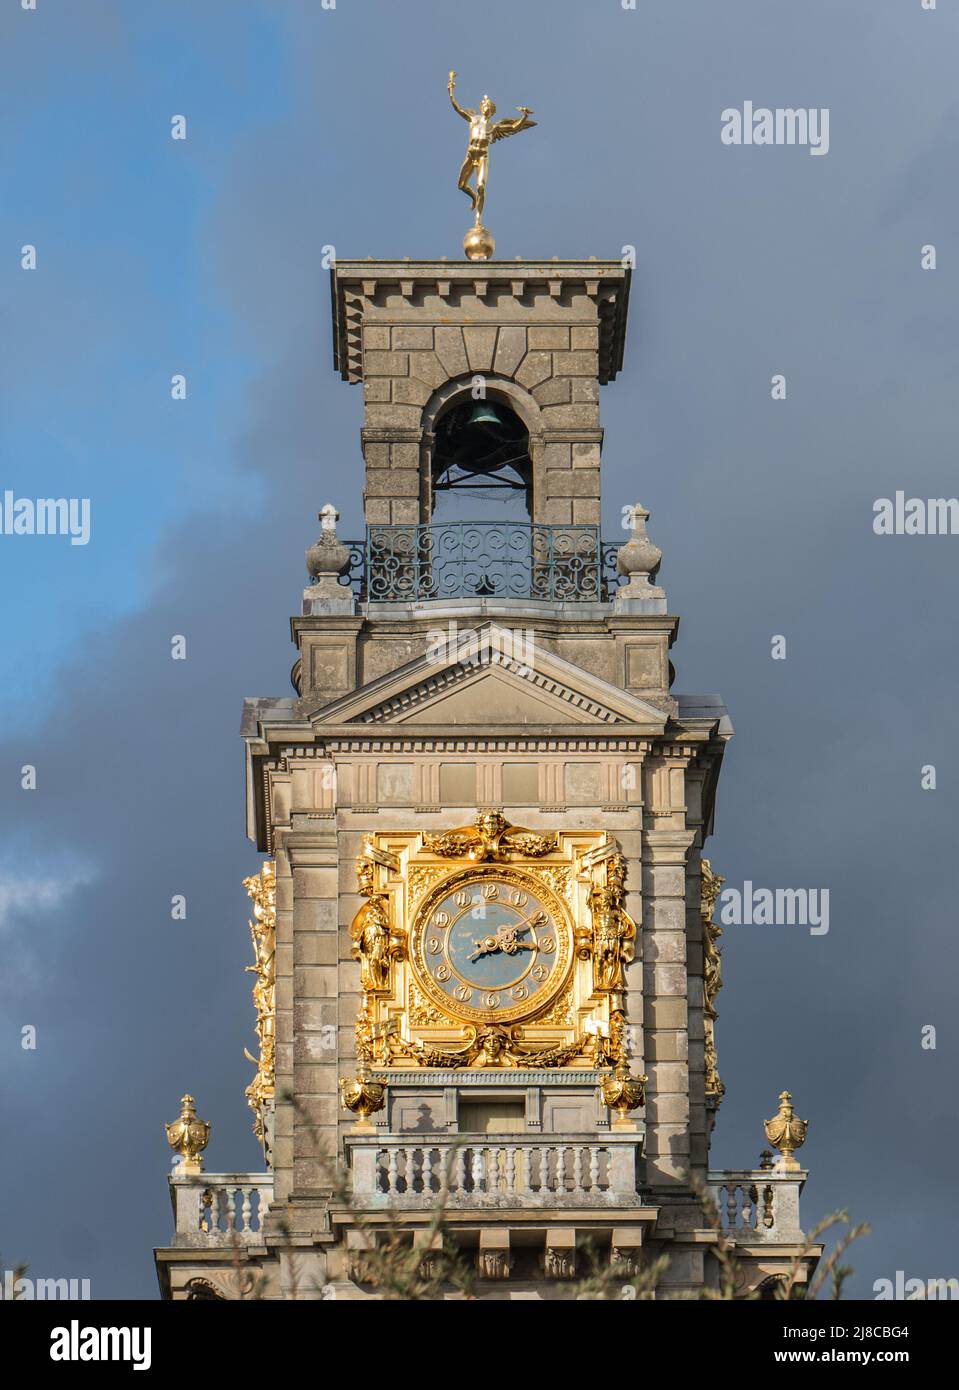 The top of  the Clocktower at Cliveden House, Berkshire Stock Photo